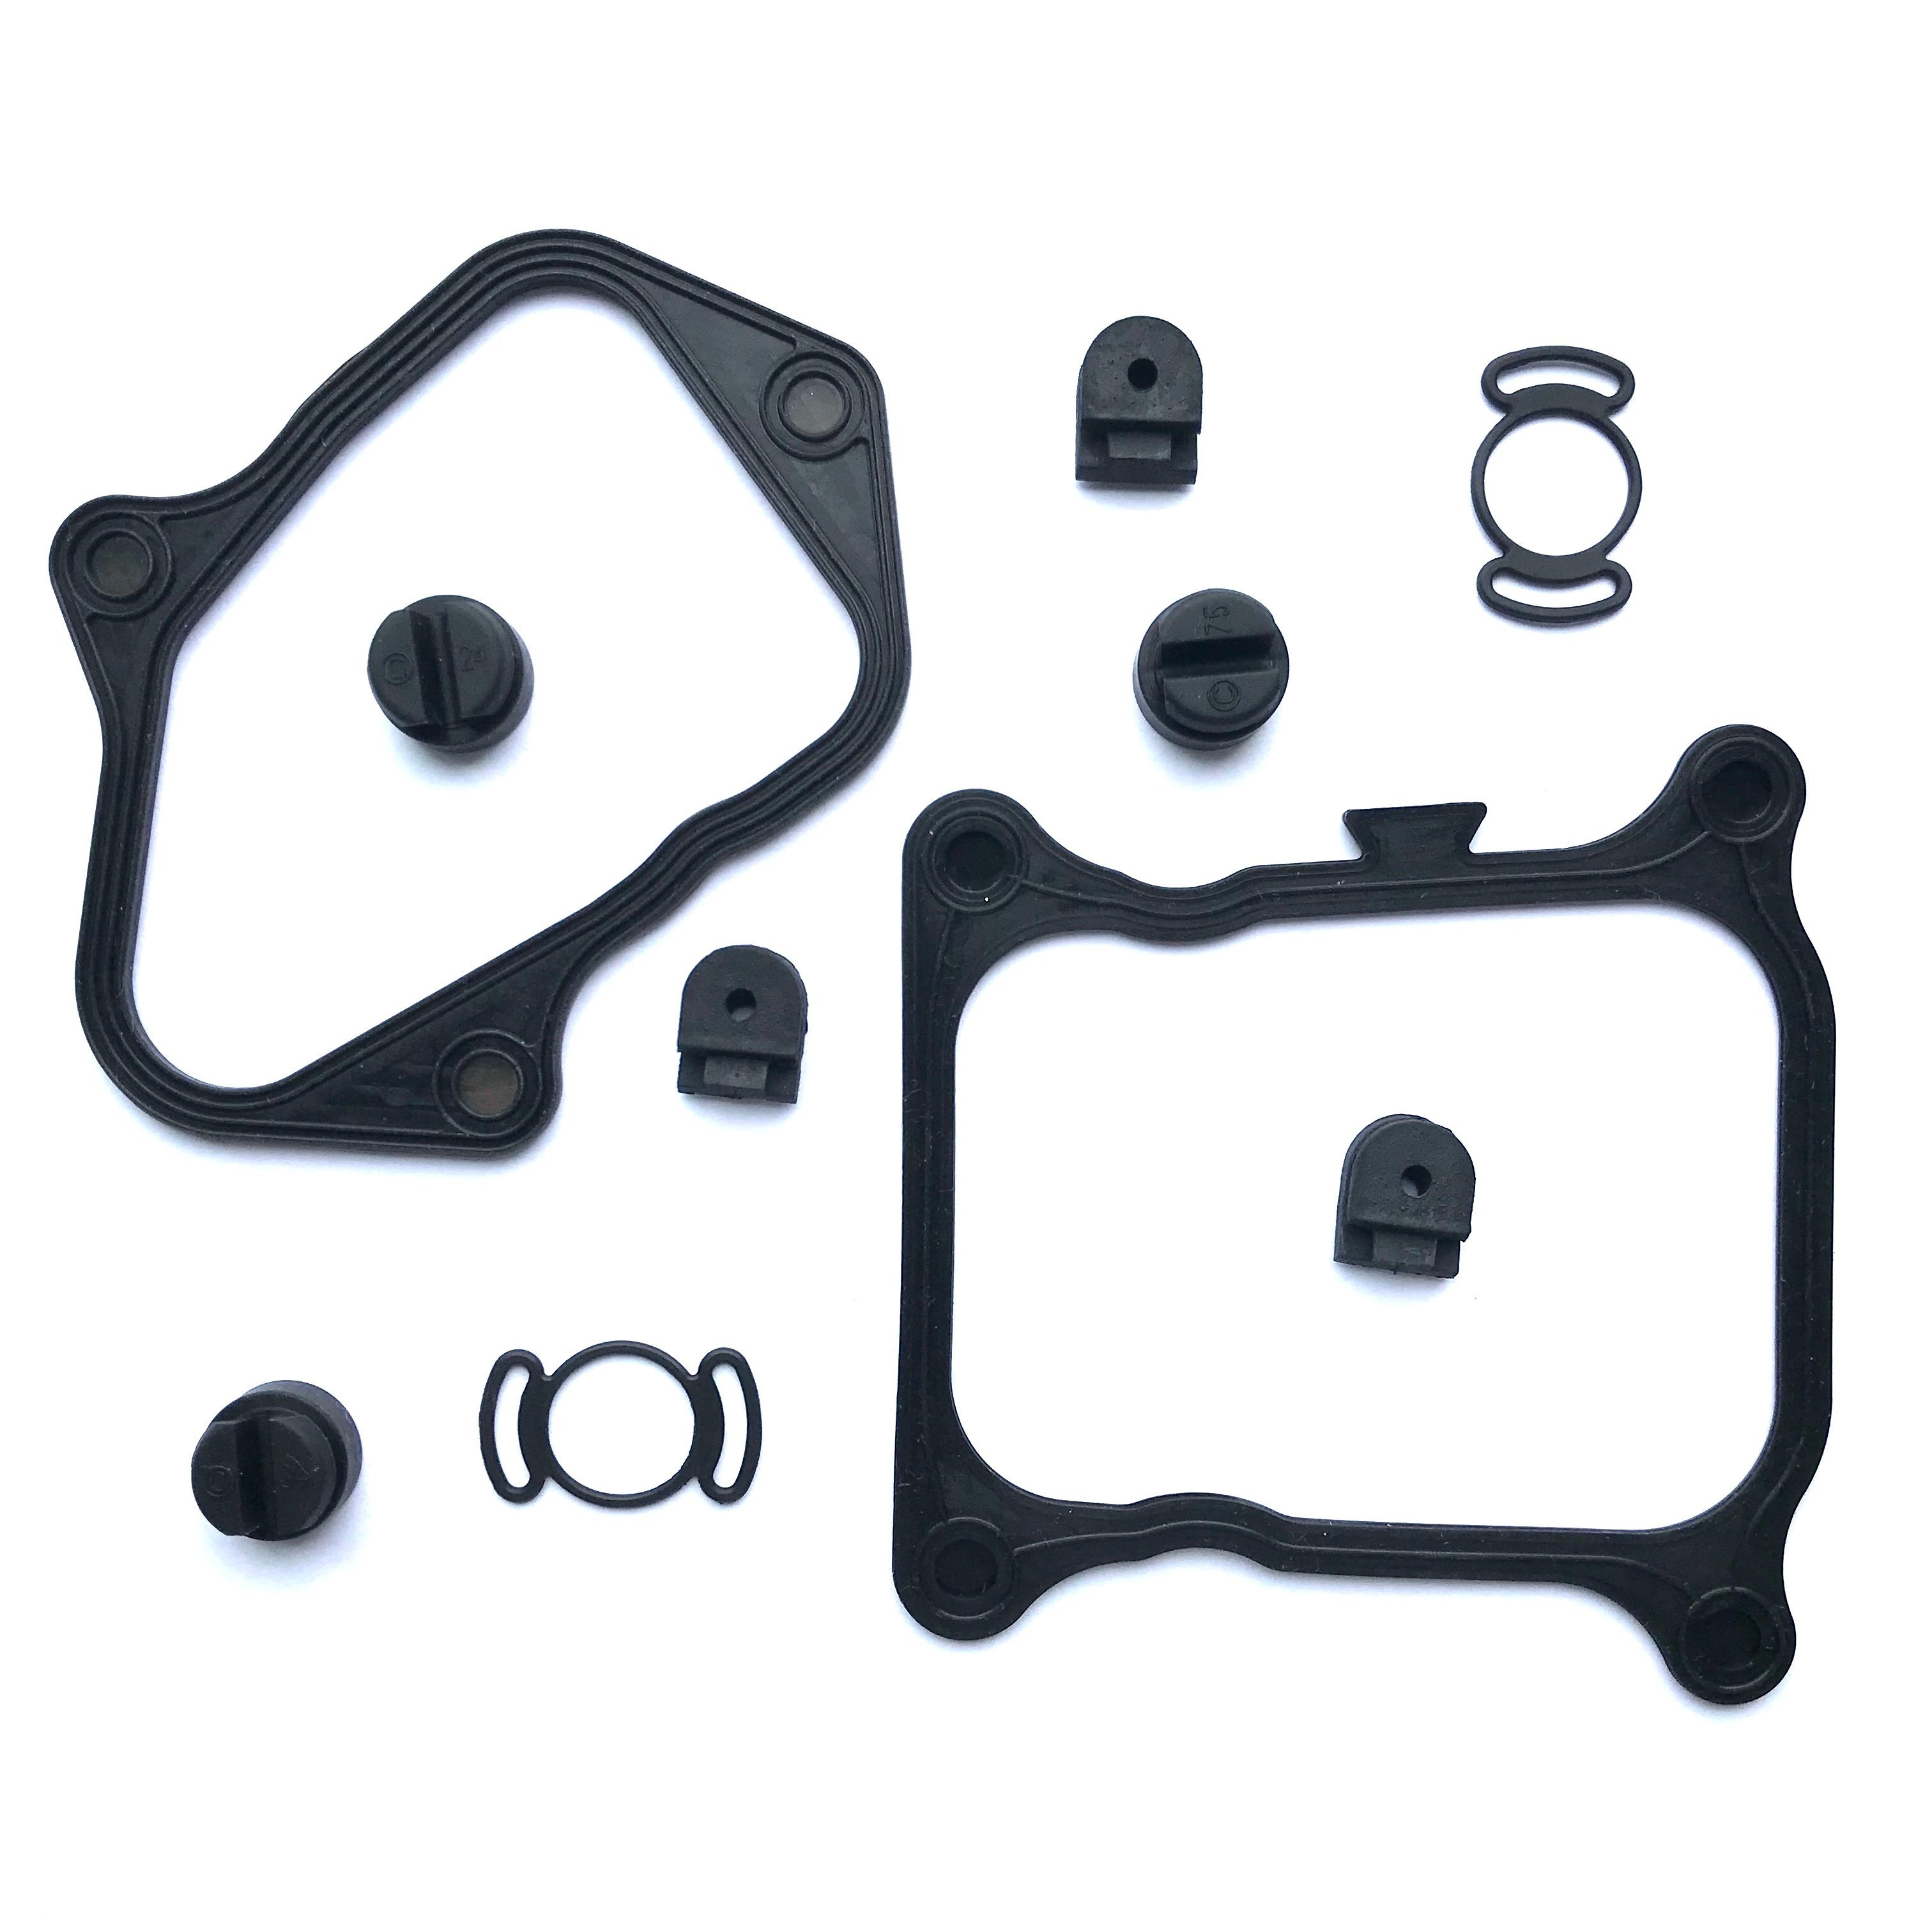 OEM ODM Customized Molded Auto Engine NBR EPDM CR Rubber Part